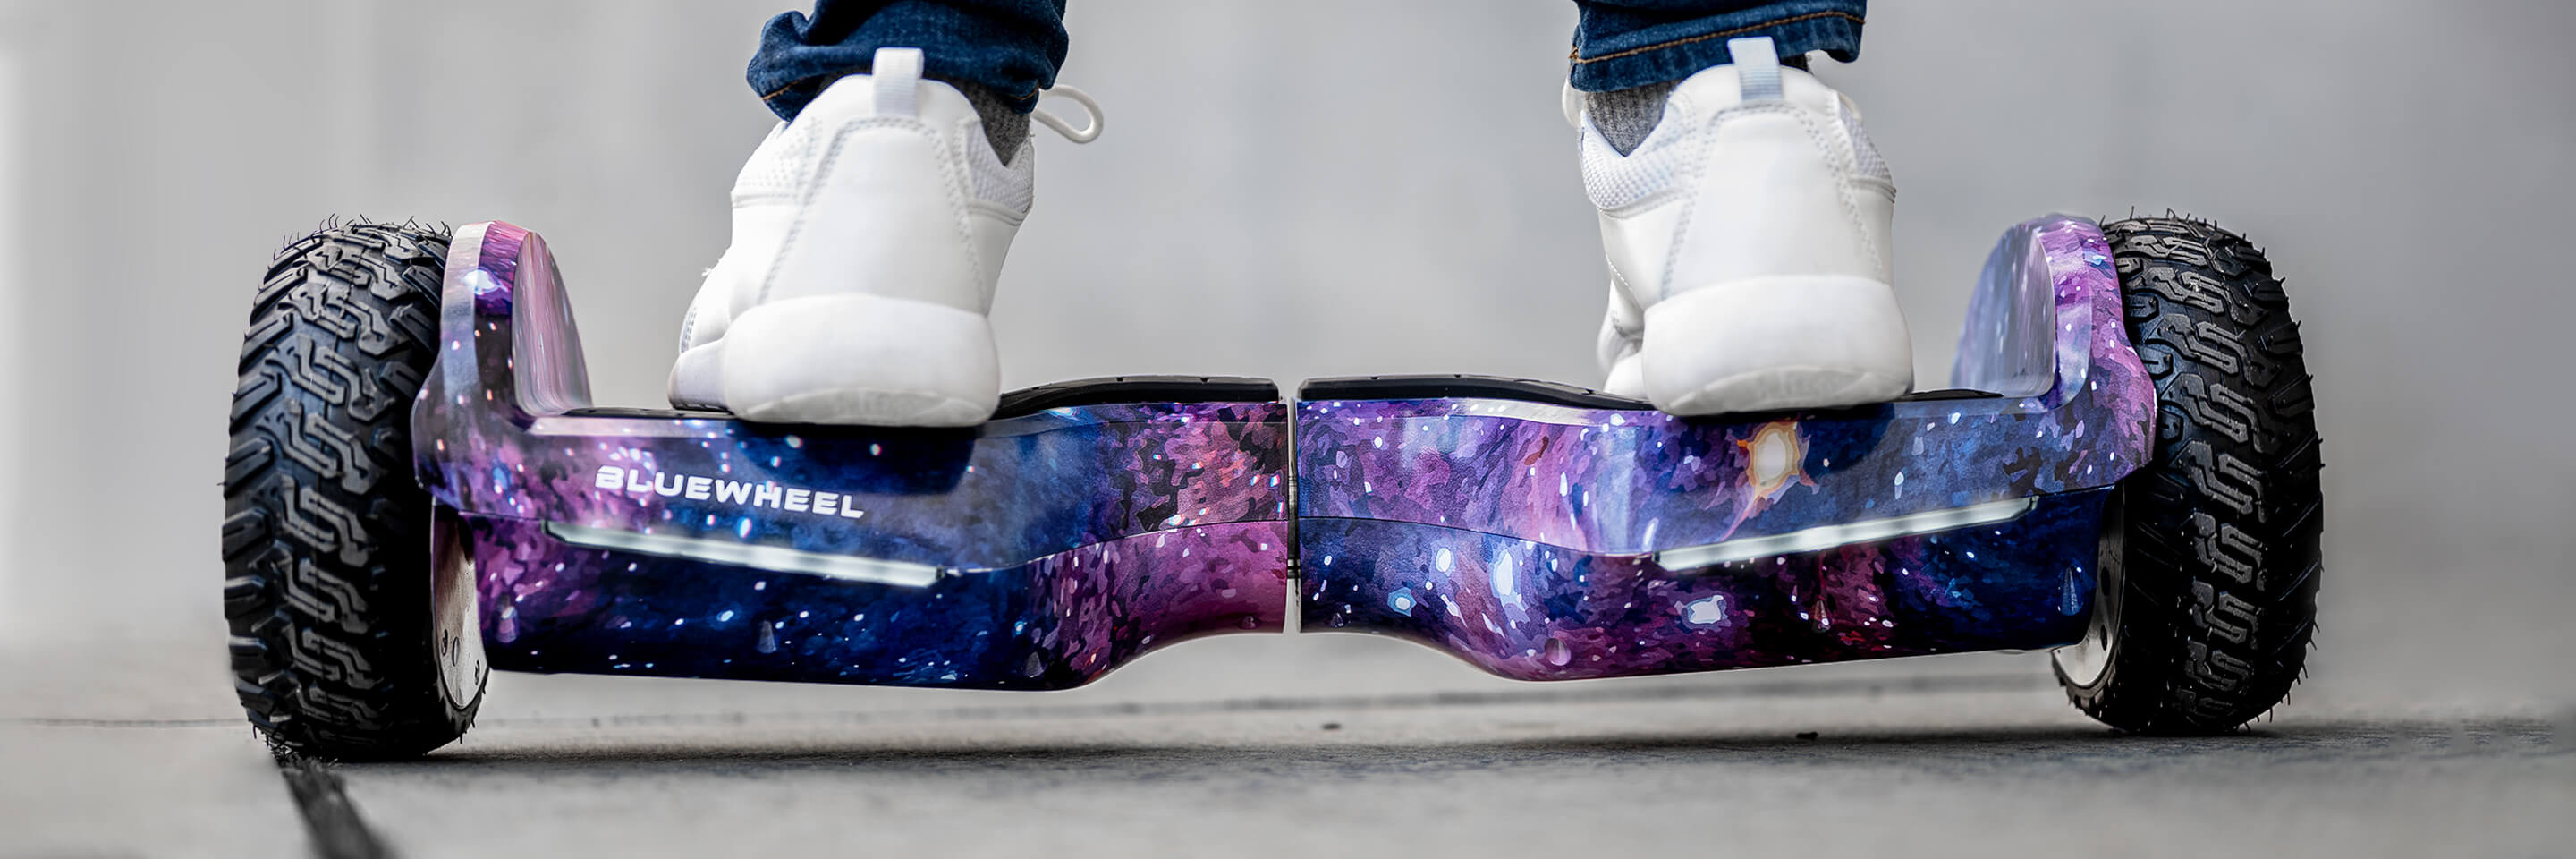 hoverboard-hx380-topbanner